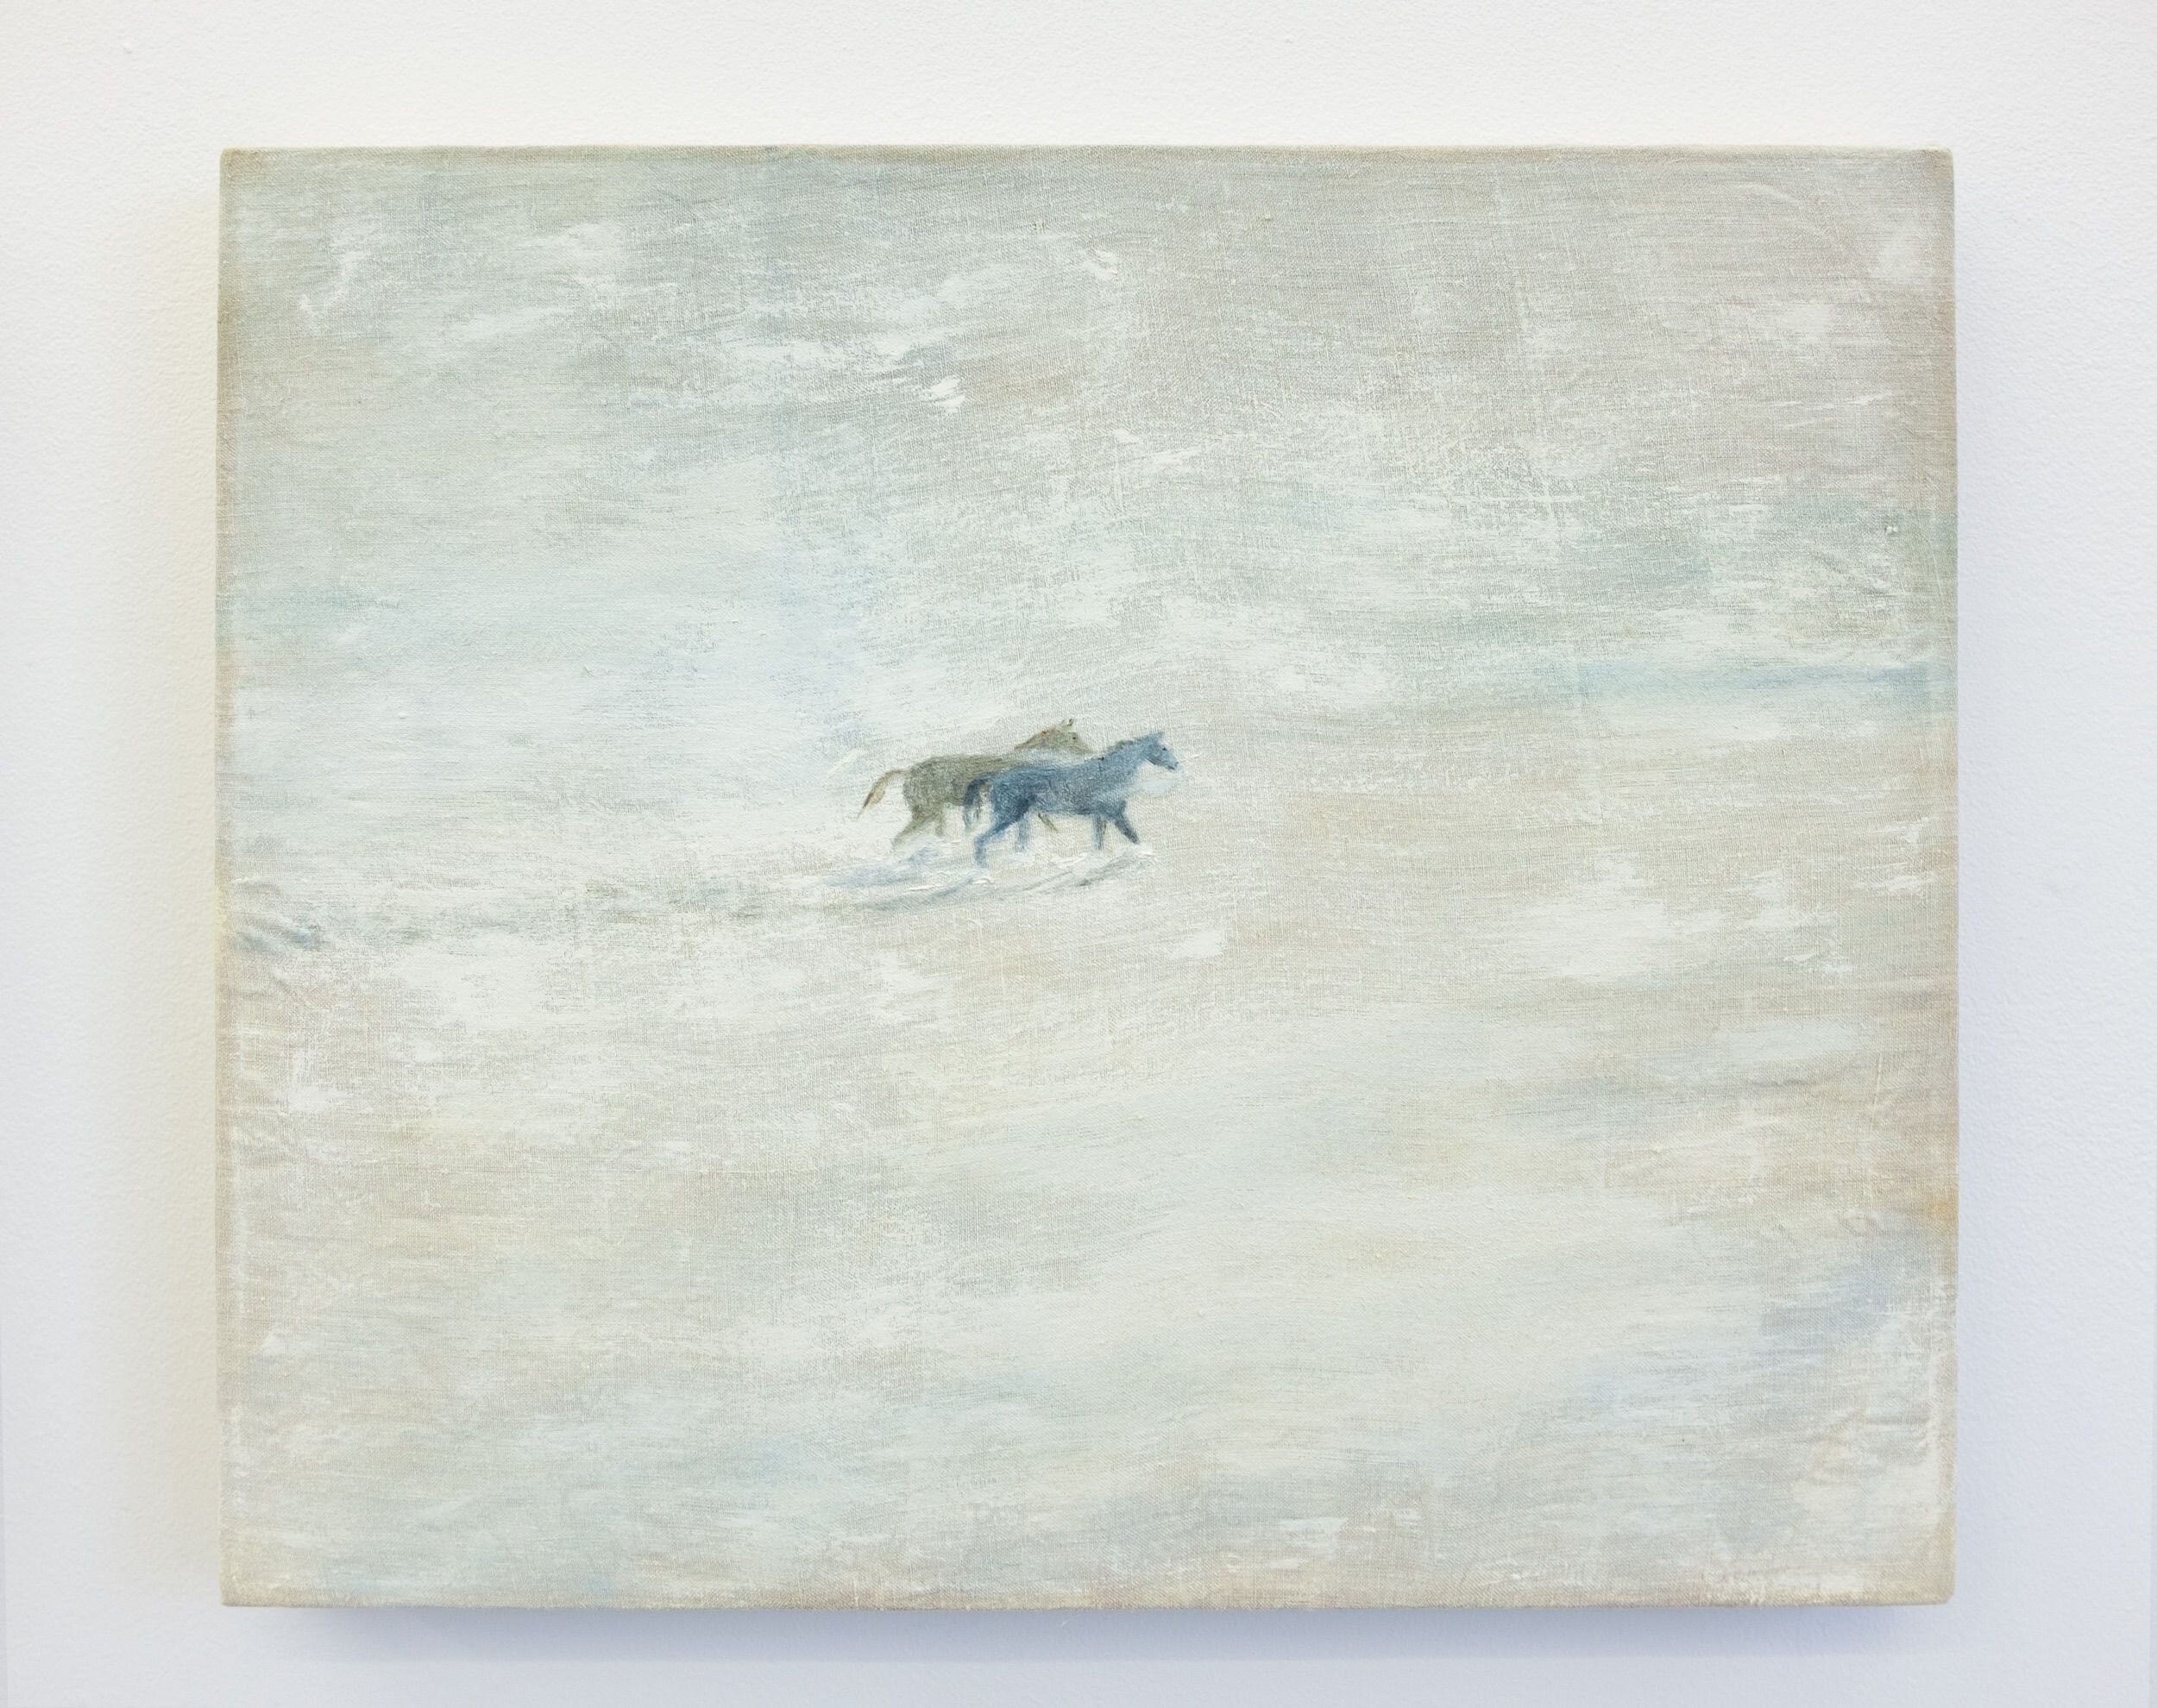  Katelyn Eichwald  Two Horses , 2020 Oil on linen 18 x 15 inches 